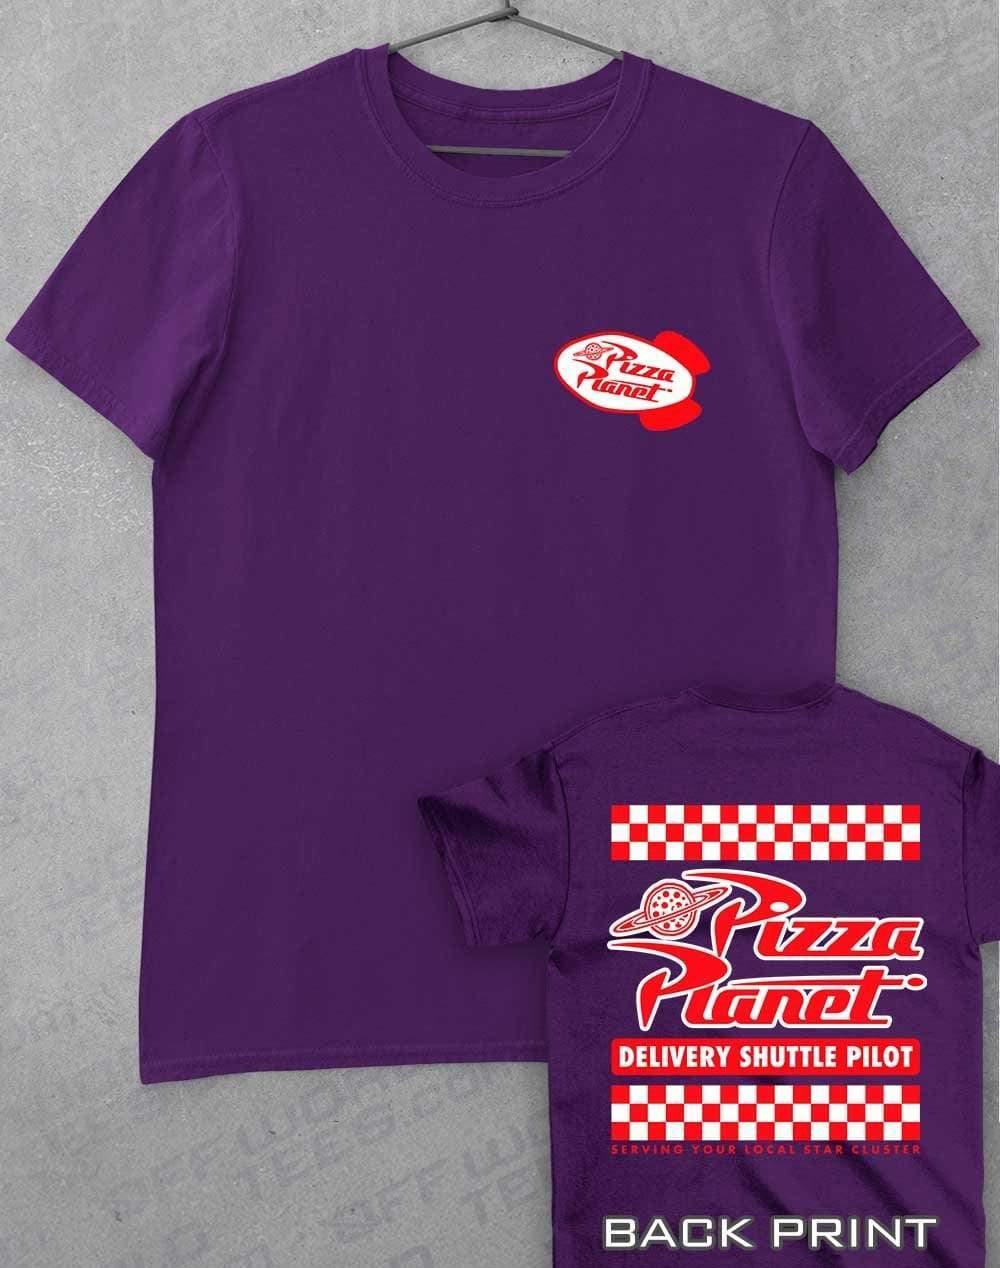 Pizza Planet Shuttle Pilot with Back Print T-Shirt S / Purple  - Off World Tees